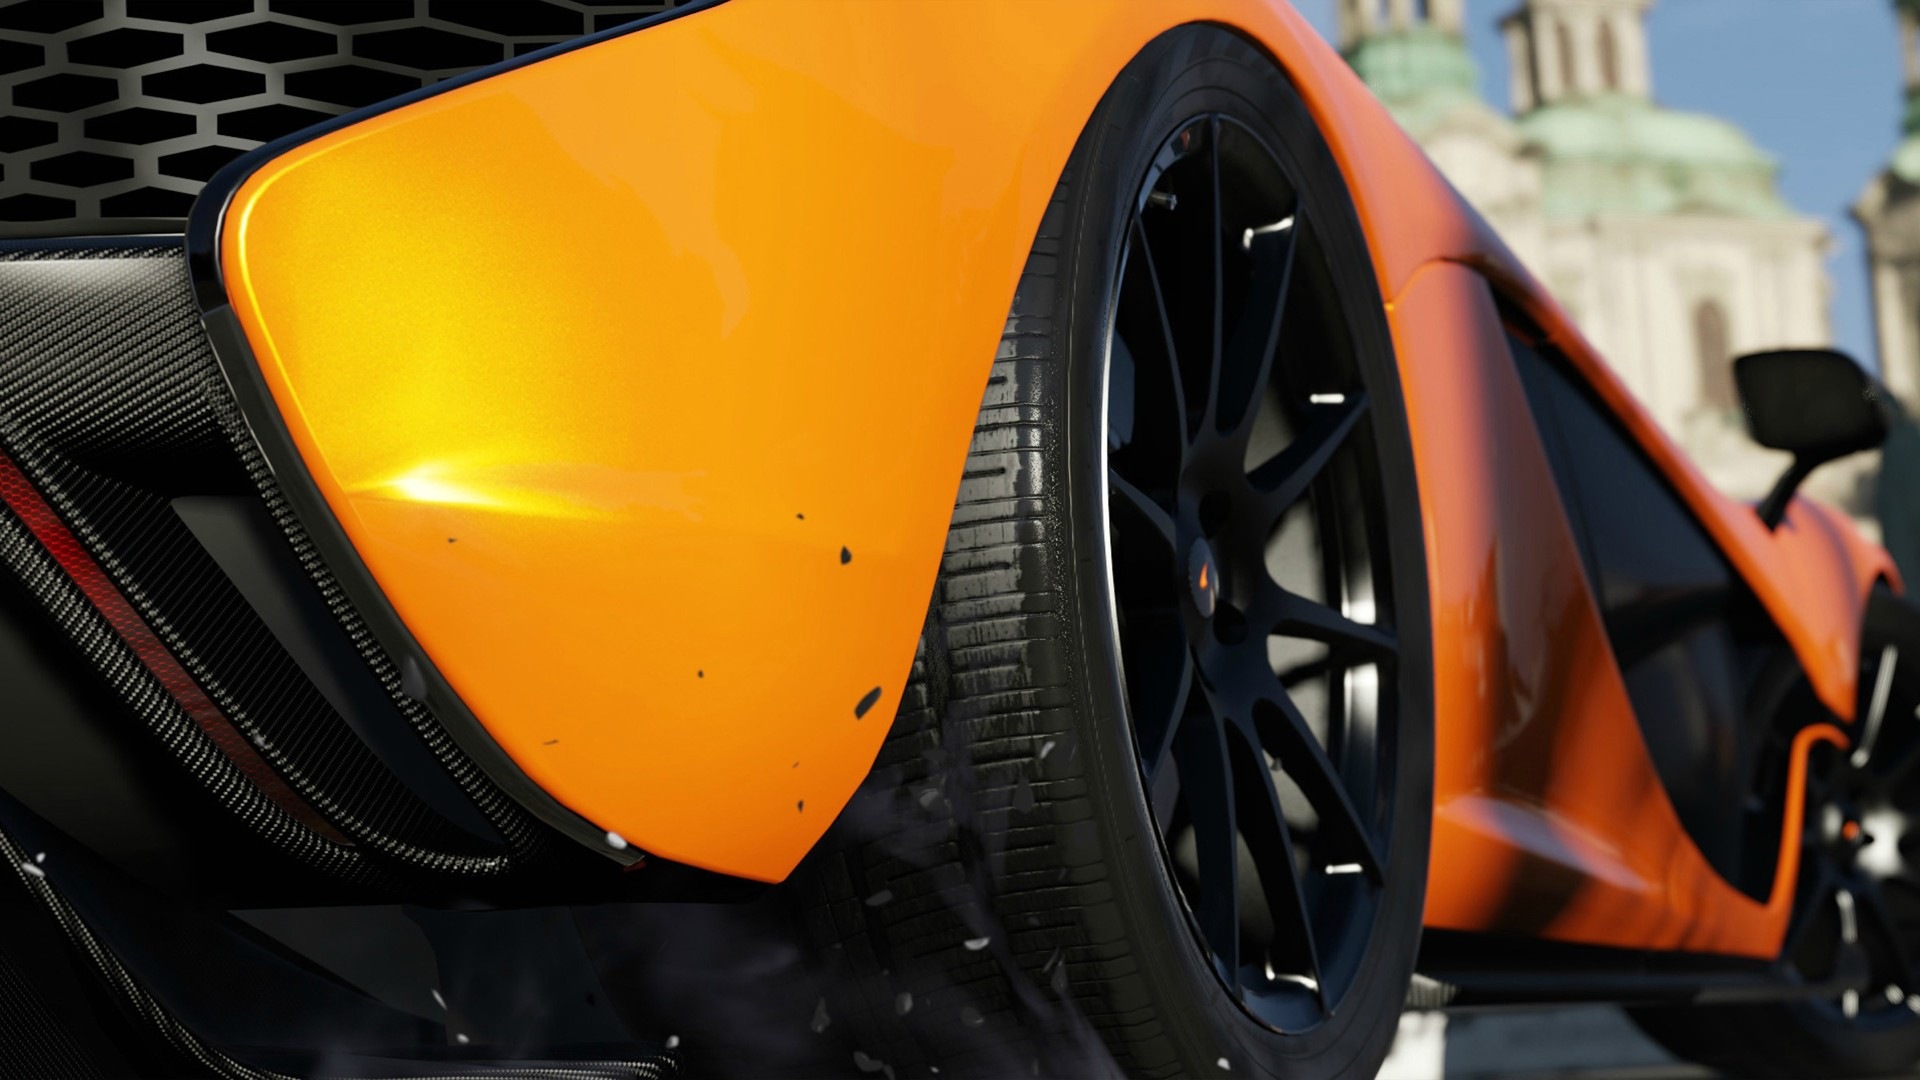 Forza Motorsport 5 HD game wallpapers #20 - 1920x1080